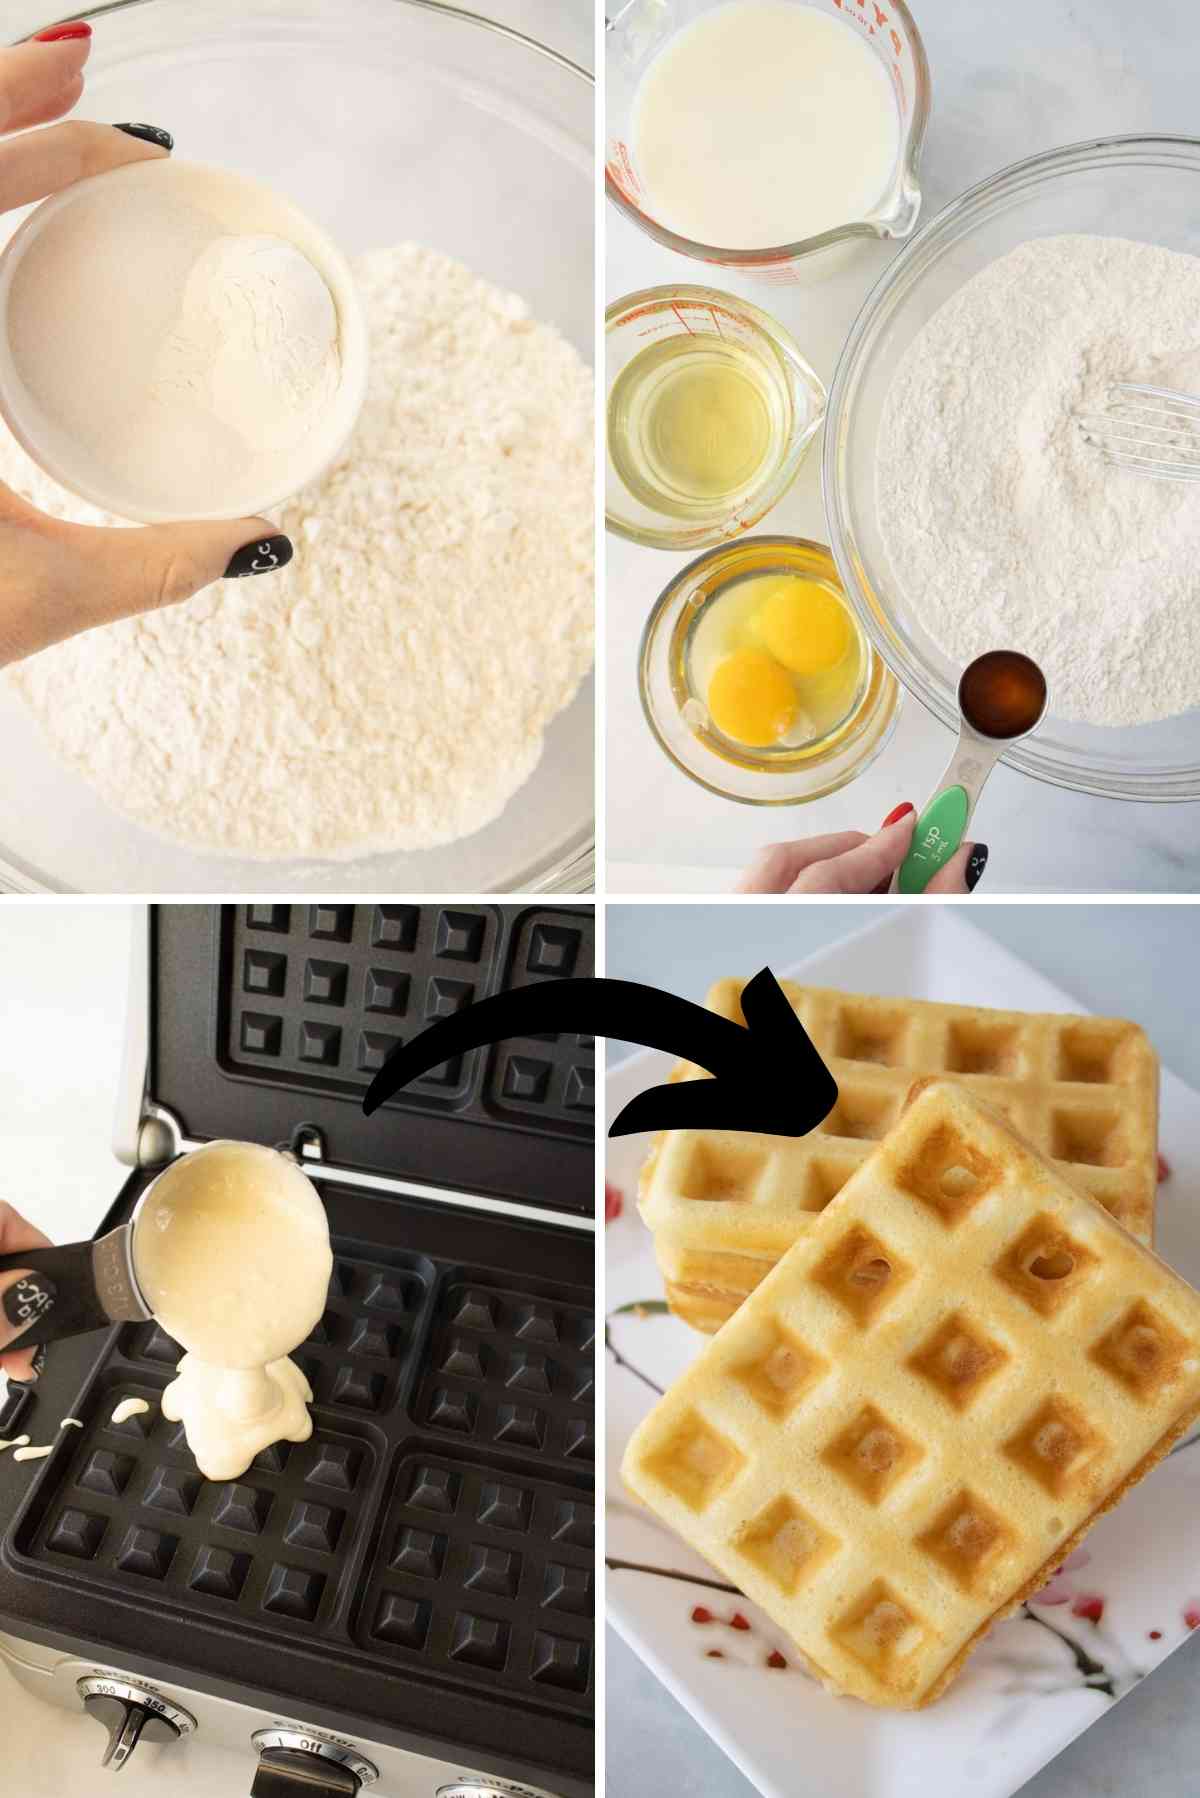 Mix up the waffle batter and cook on a hot waffle iron.